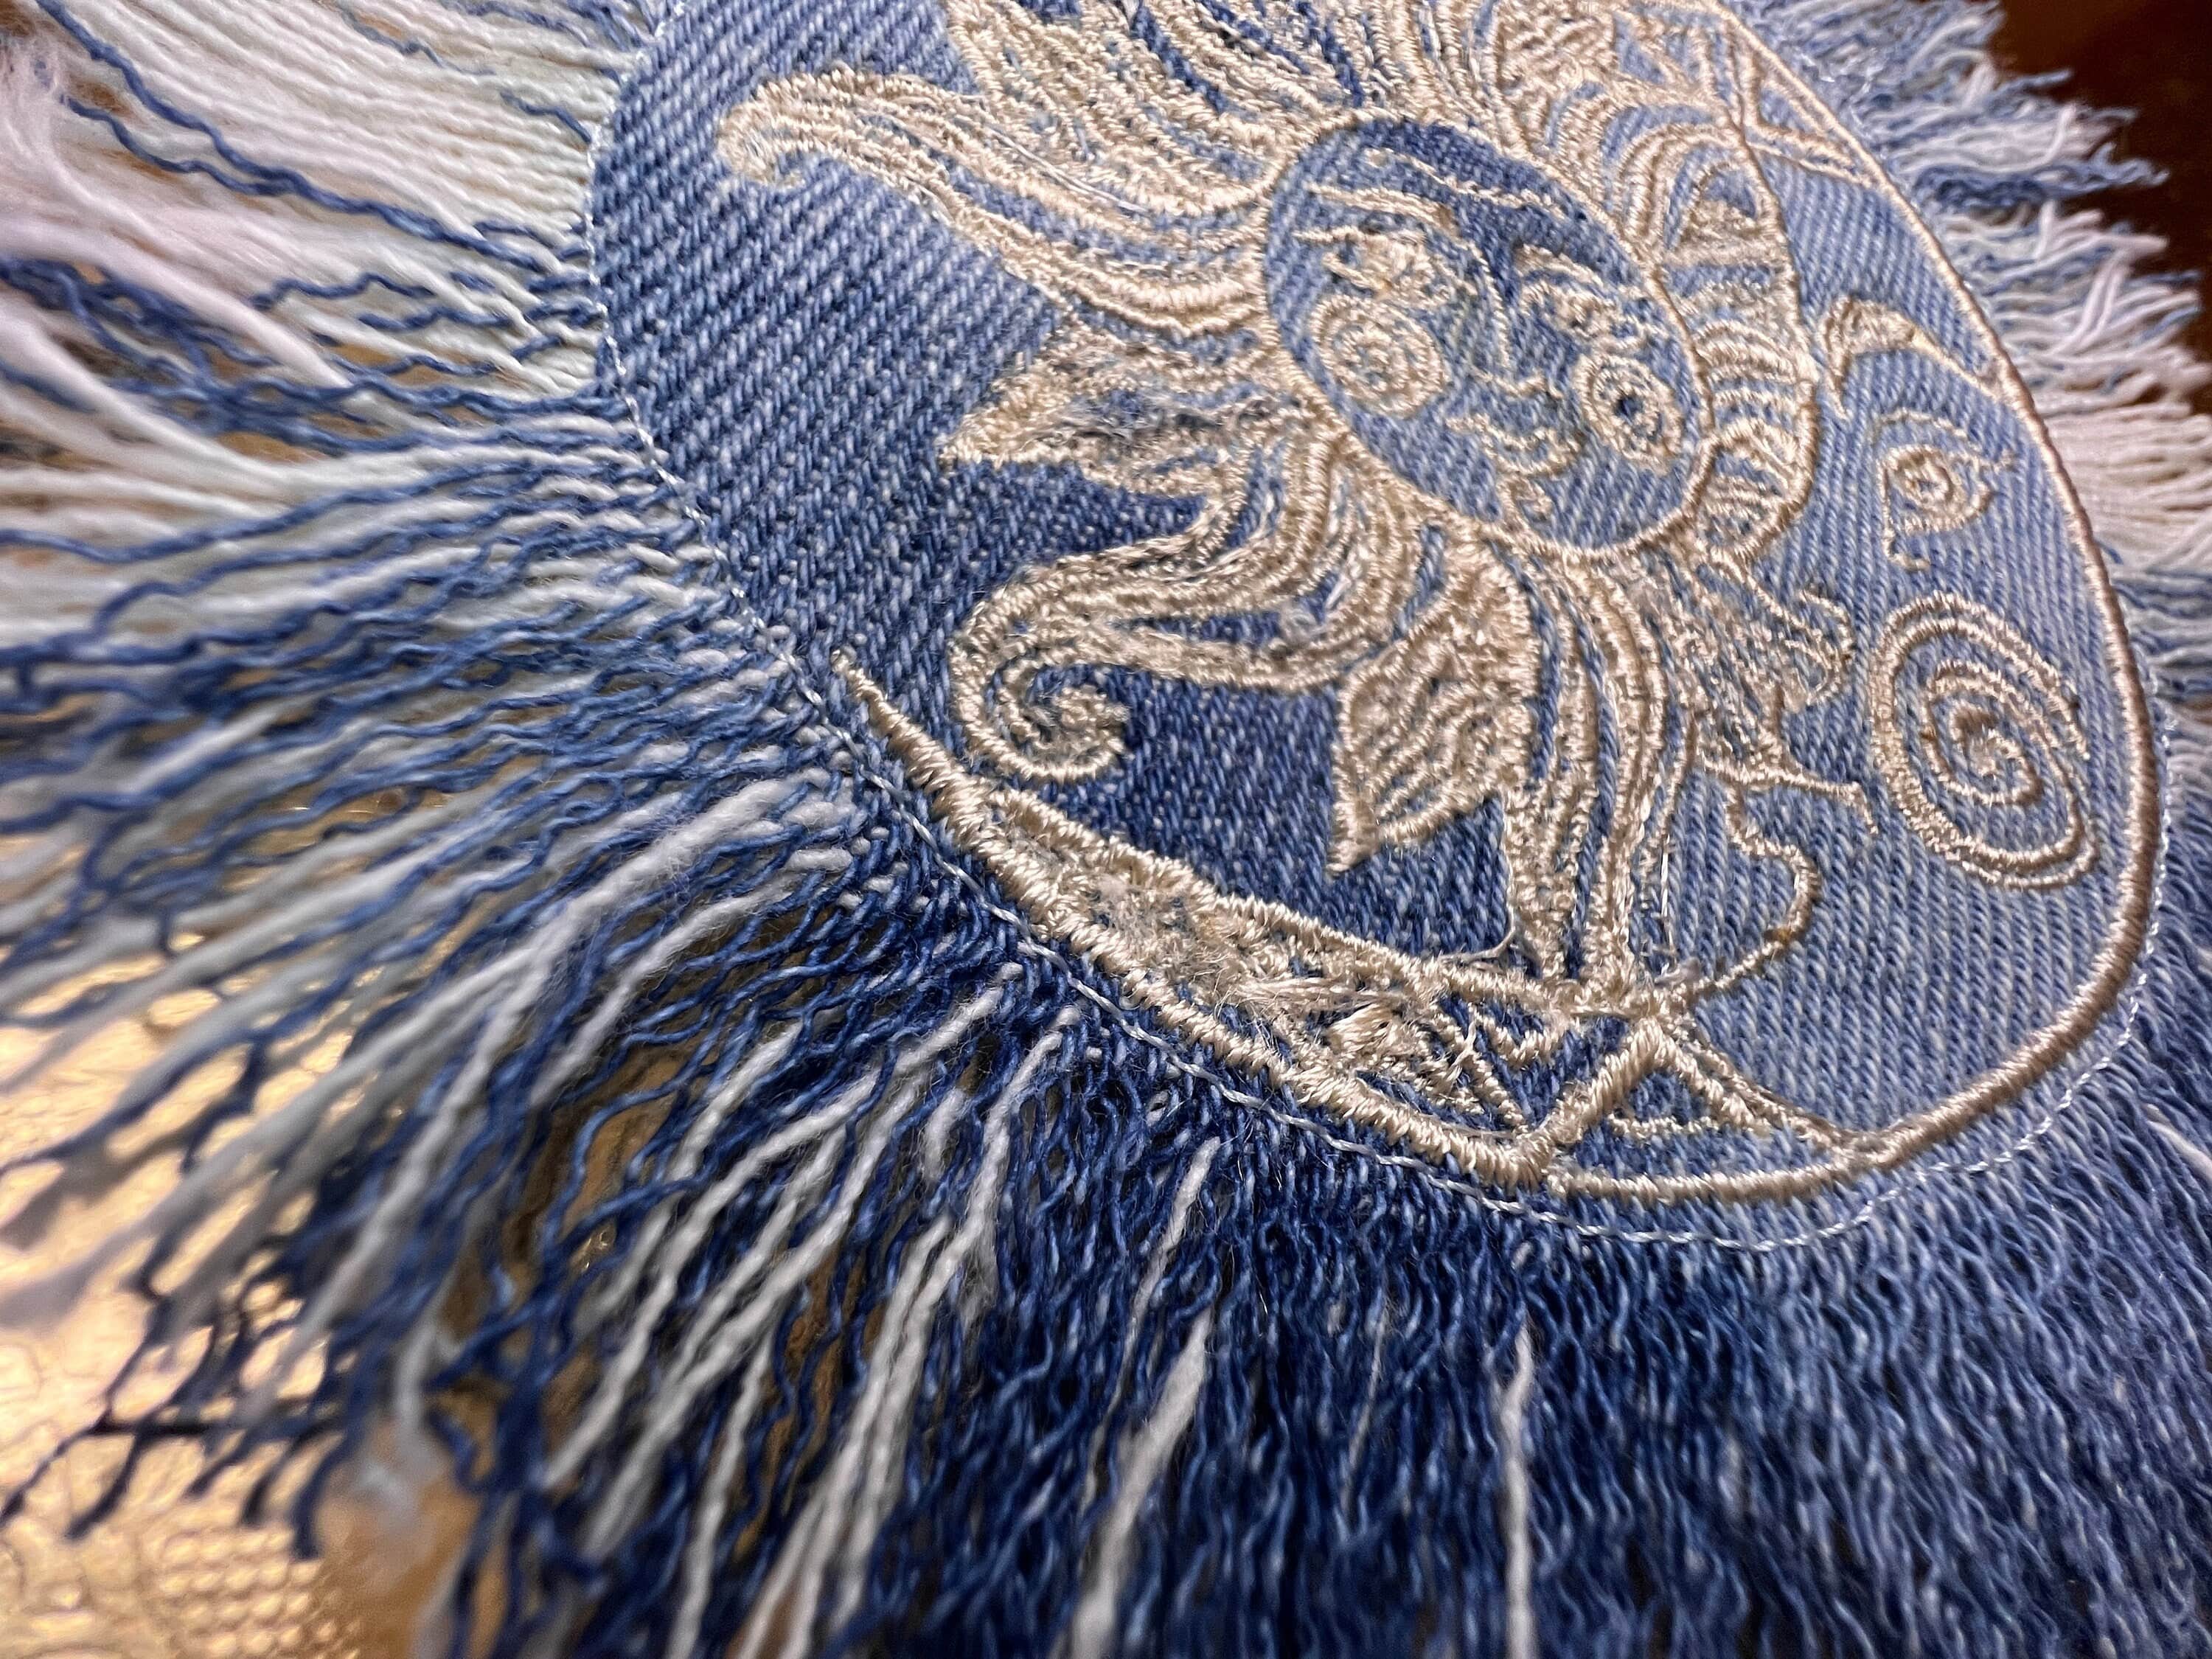 Sun & Moon Bleached Blue Denim FRINGED Patch art Indigo Denim CELESTIAL 5" Round IRON On Jean Patches embroidered Sol decal patchwork frayed Appliques & Patches